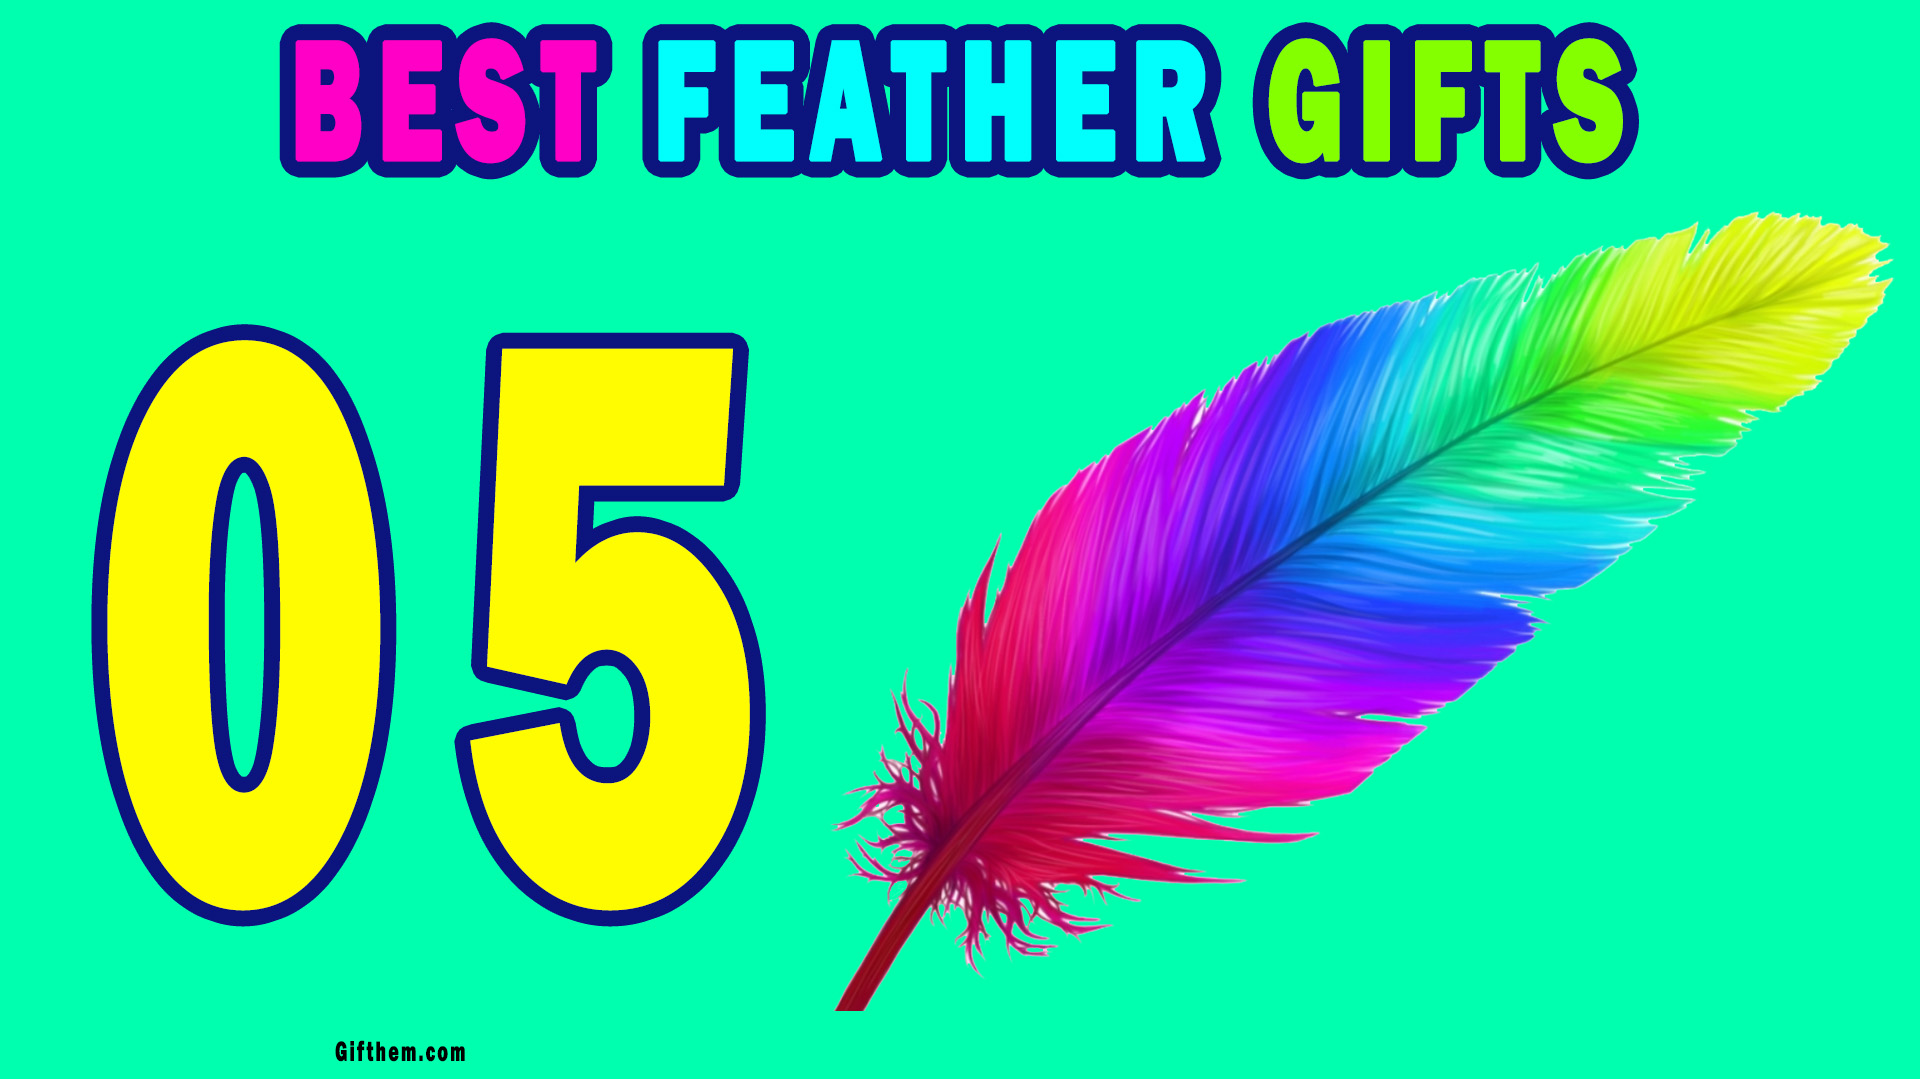 Best Feather Gifts